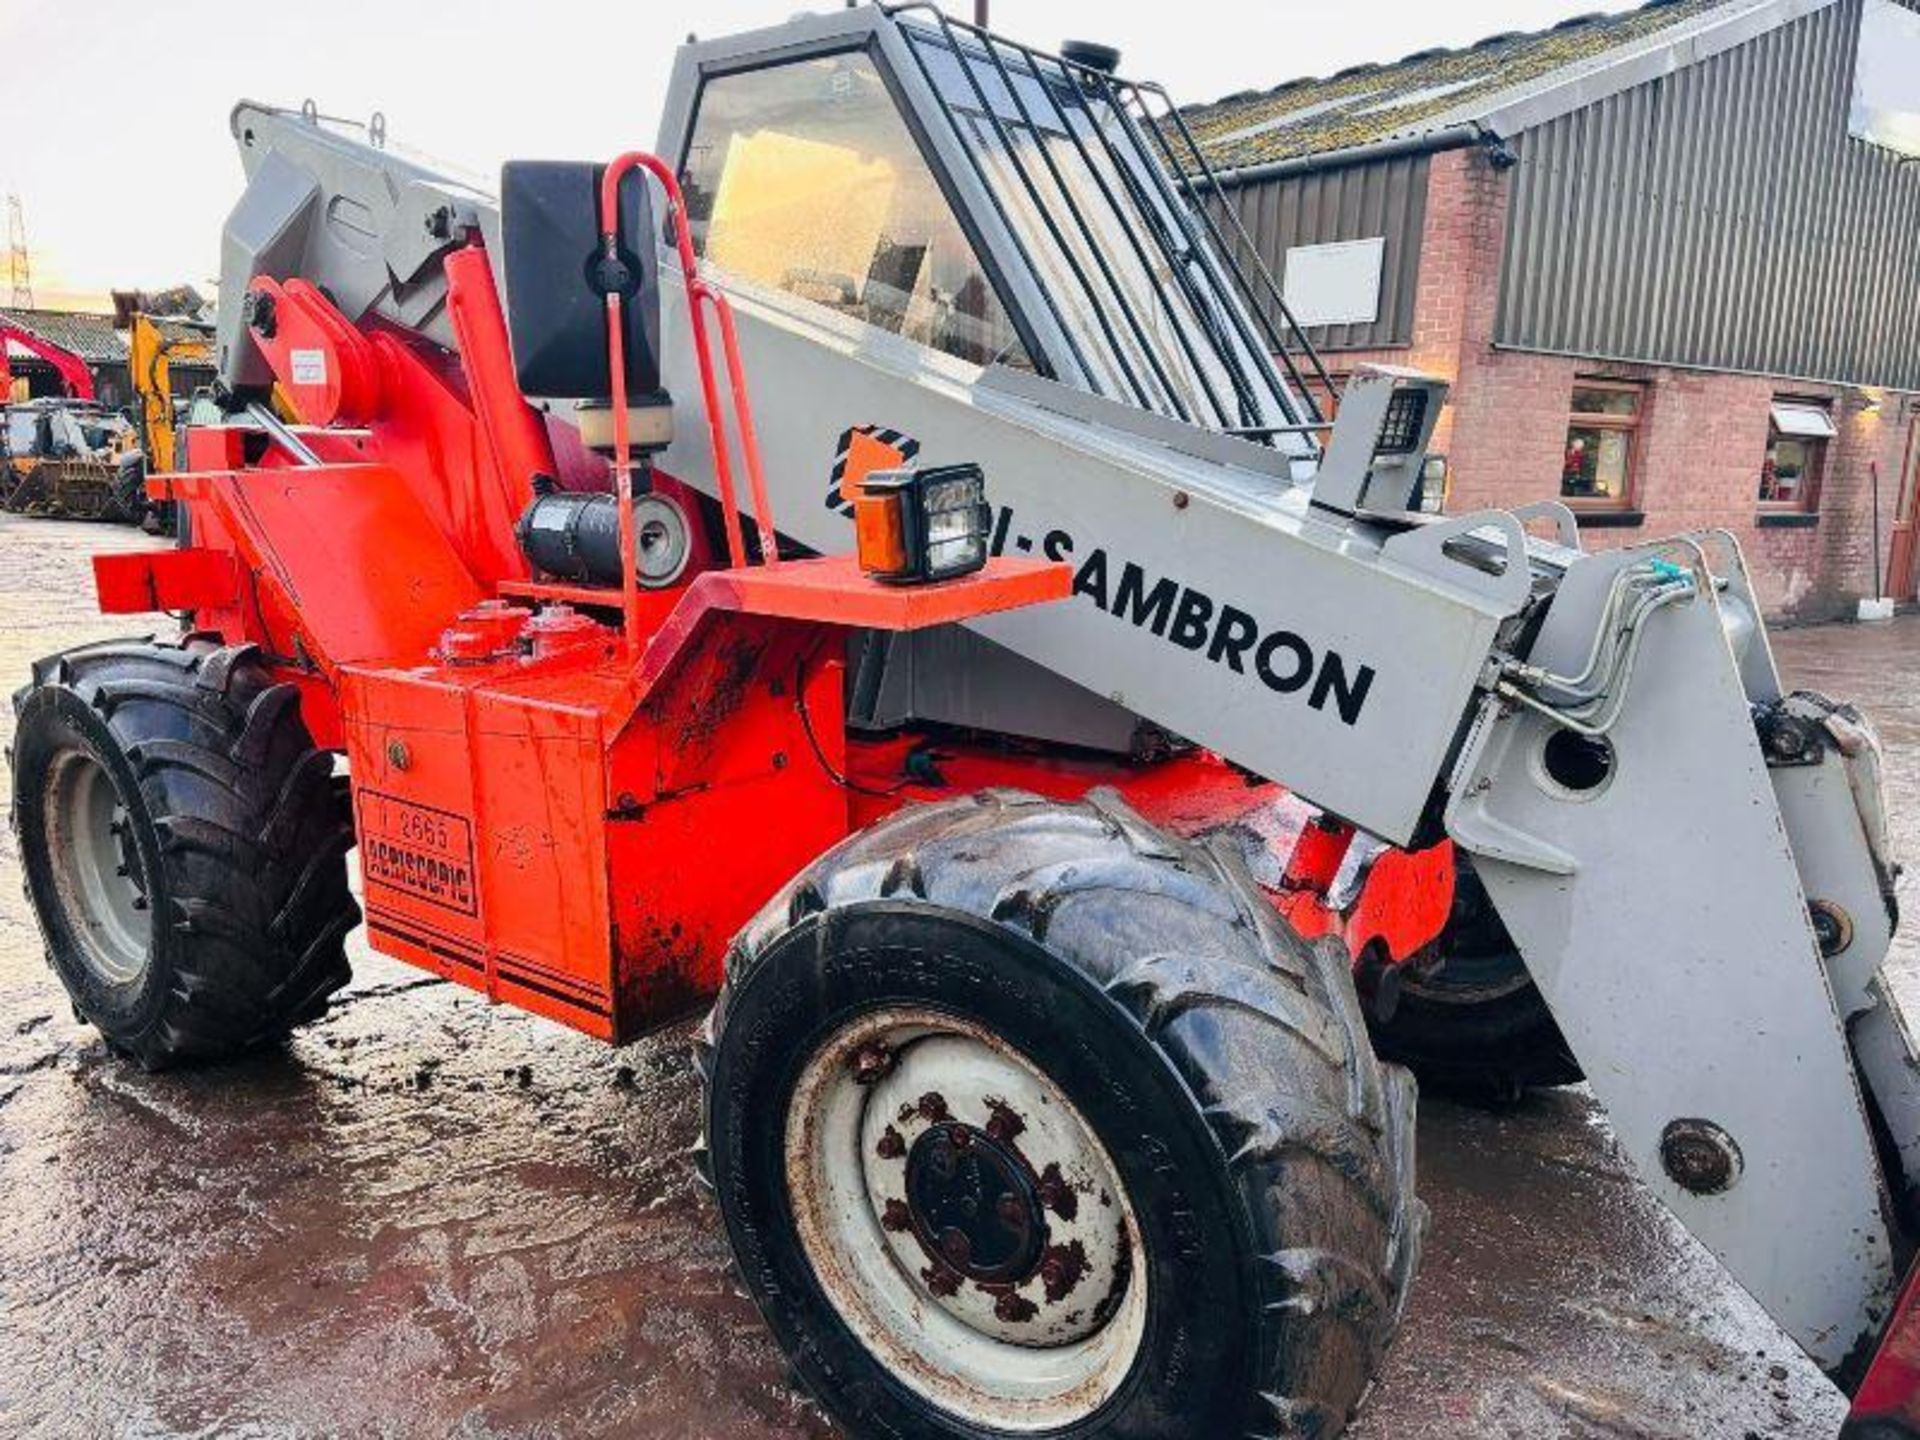 SAMBRON T2665 AGRISCOPIC 4WD TELEHANDLER C/W PALLET TINES - Image 3 of 15